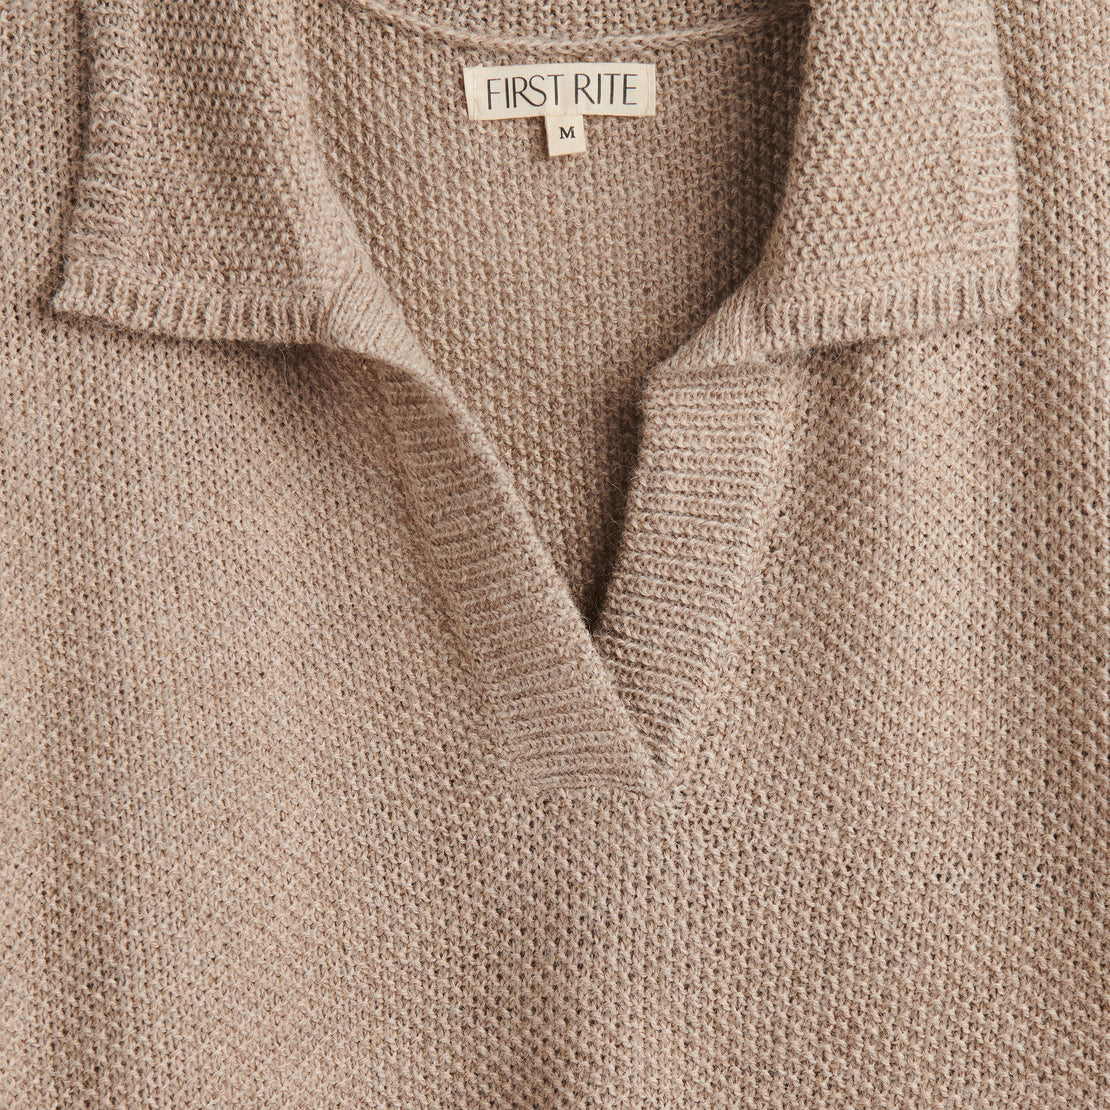 Dolman Henley Sweater - Oatmeal - First Rite - STAG Provisions - W - Tops - Sweater